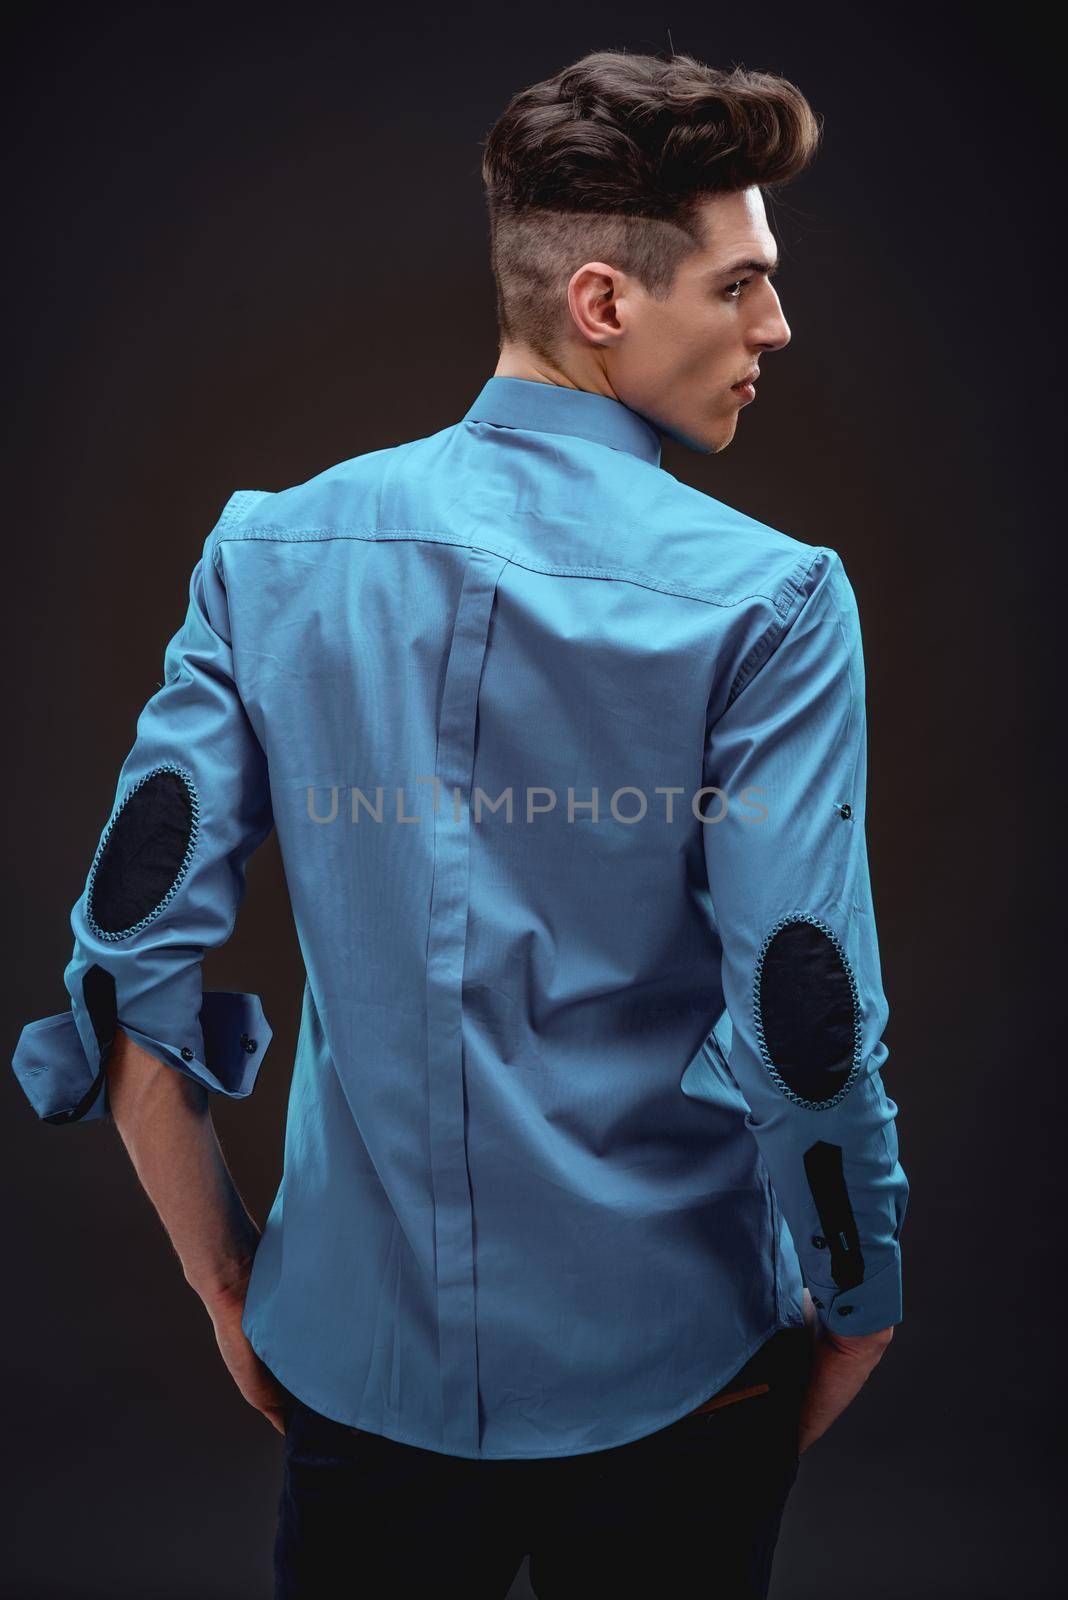 Rear view of a handsome fashionable man in turquoise shirt. Black background. 